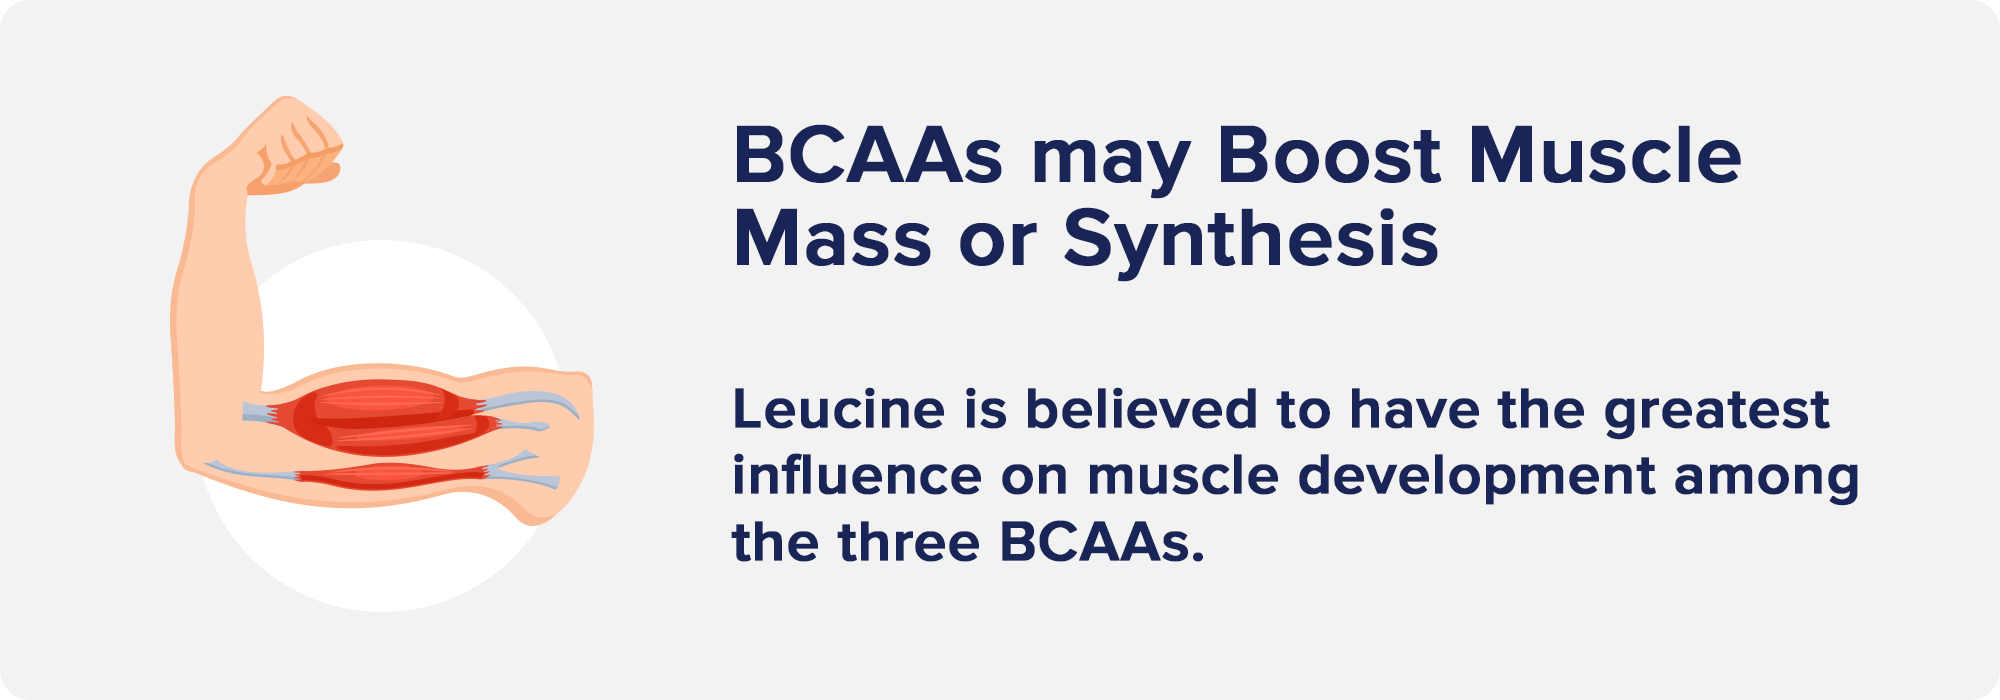 BCAAs may Boost Muscle Mass or Synthesis